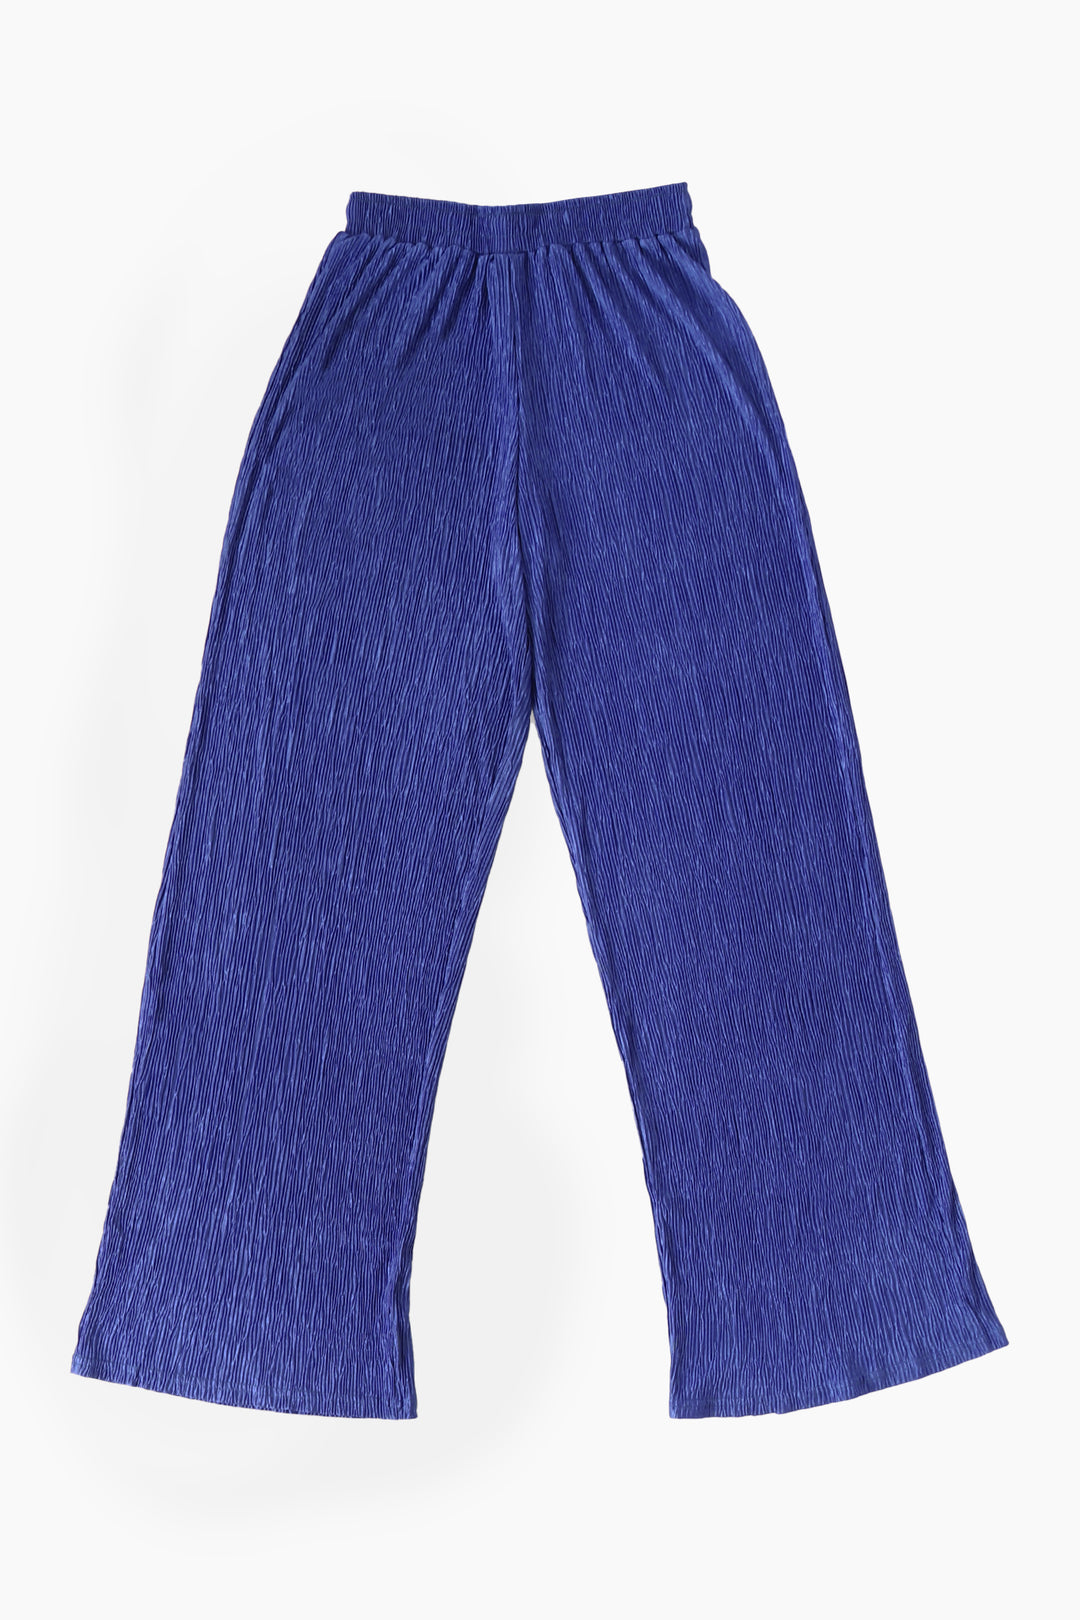 royal blue long summer trousers with elasticated smocked waist